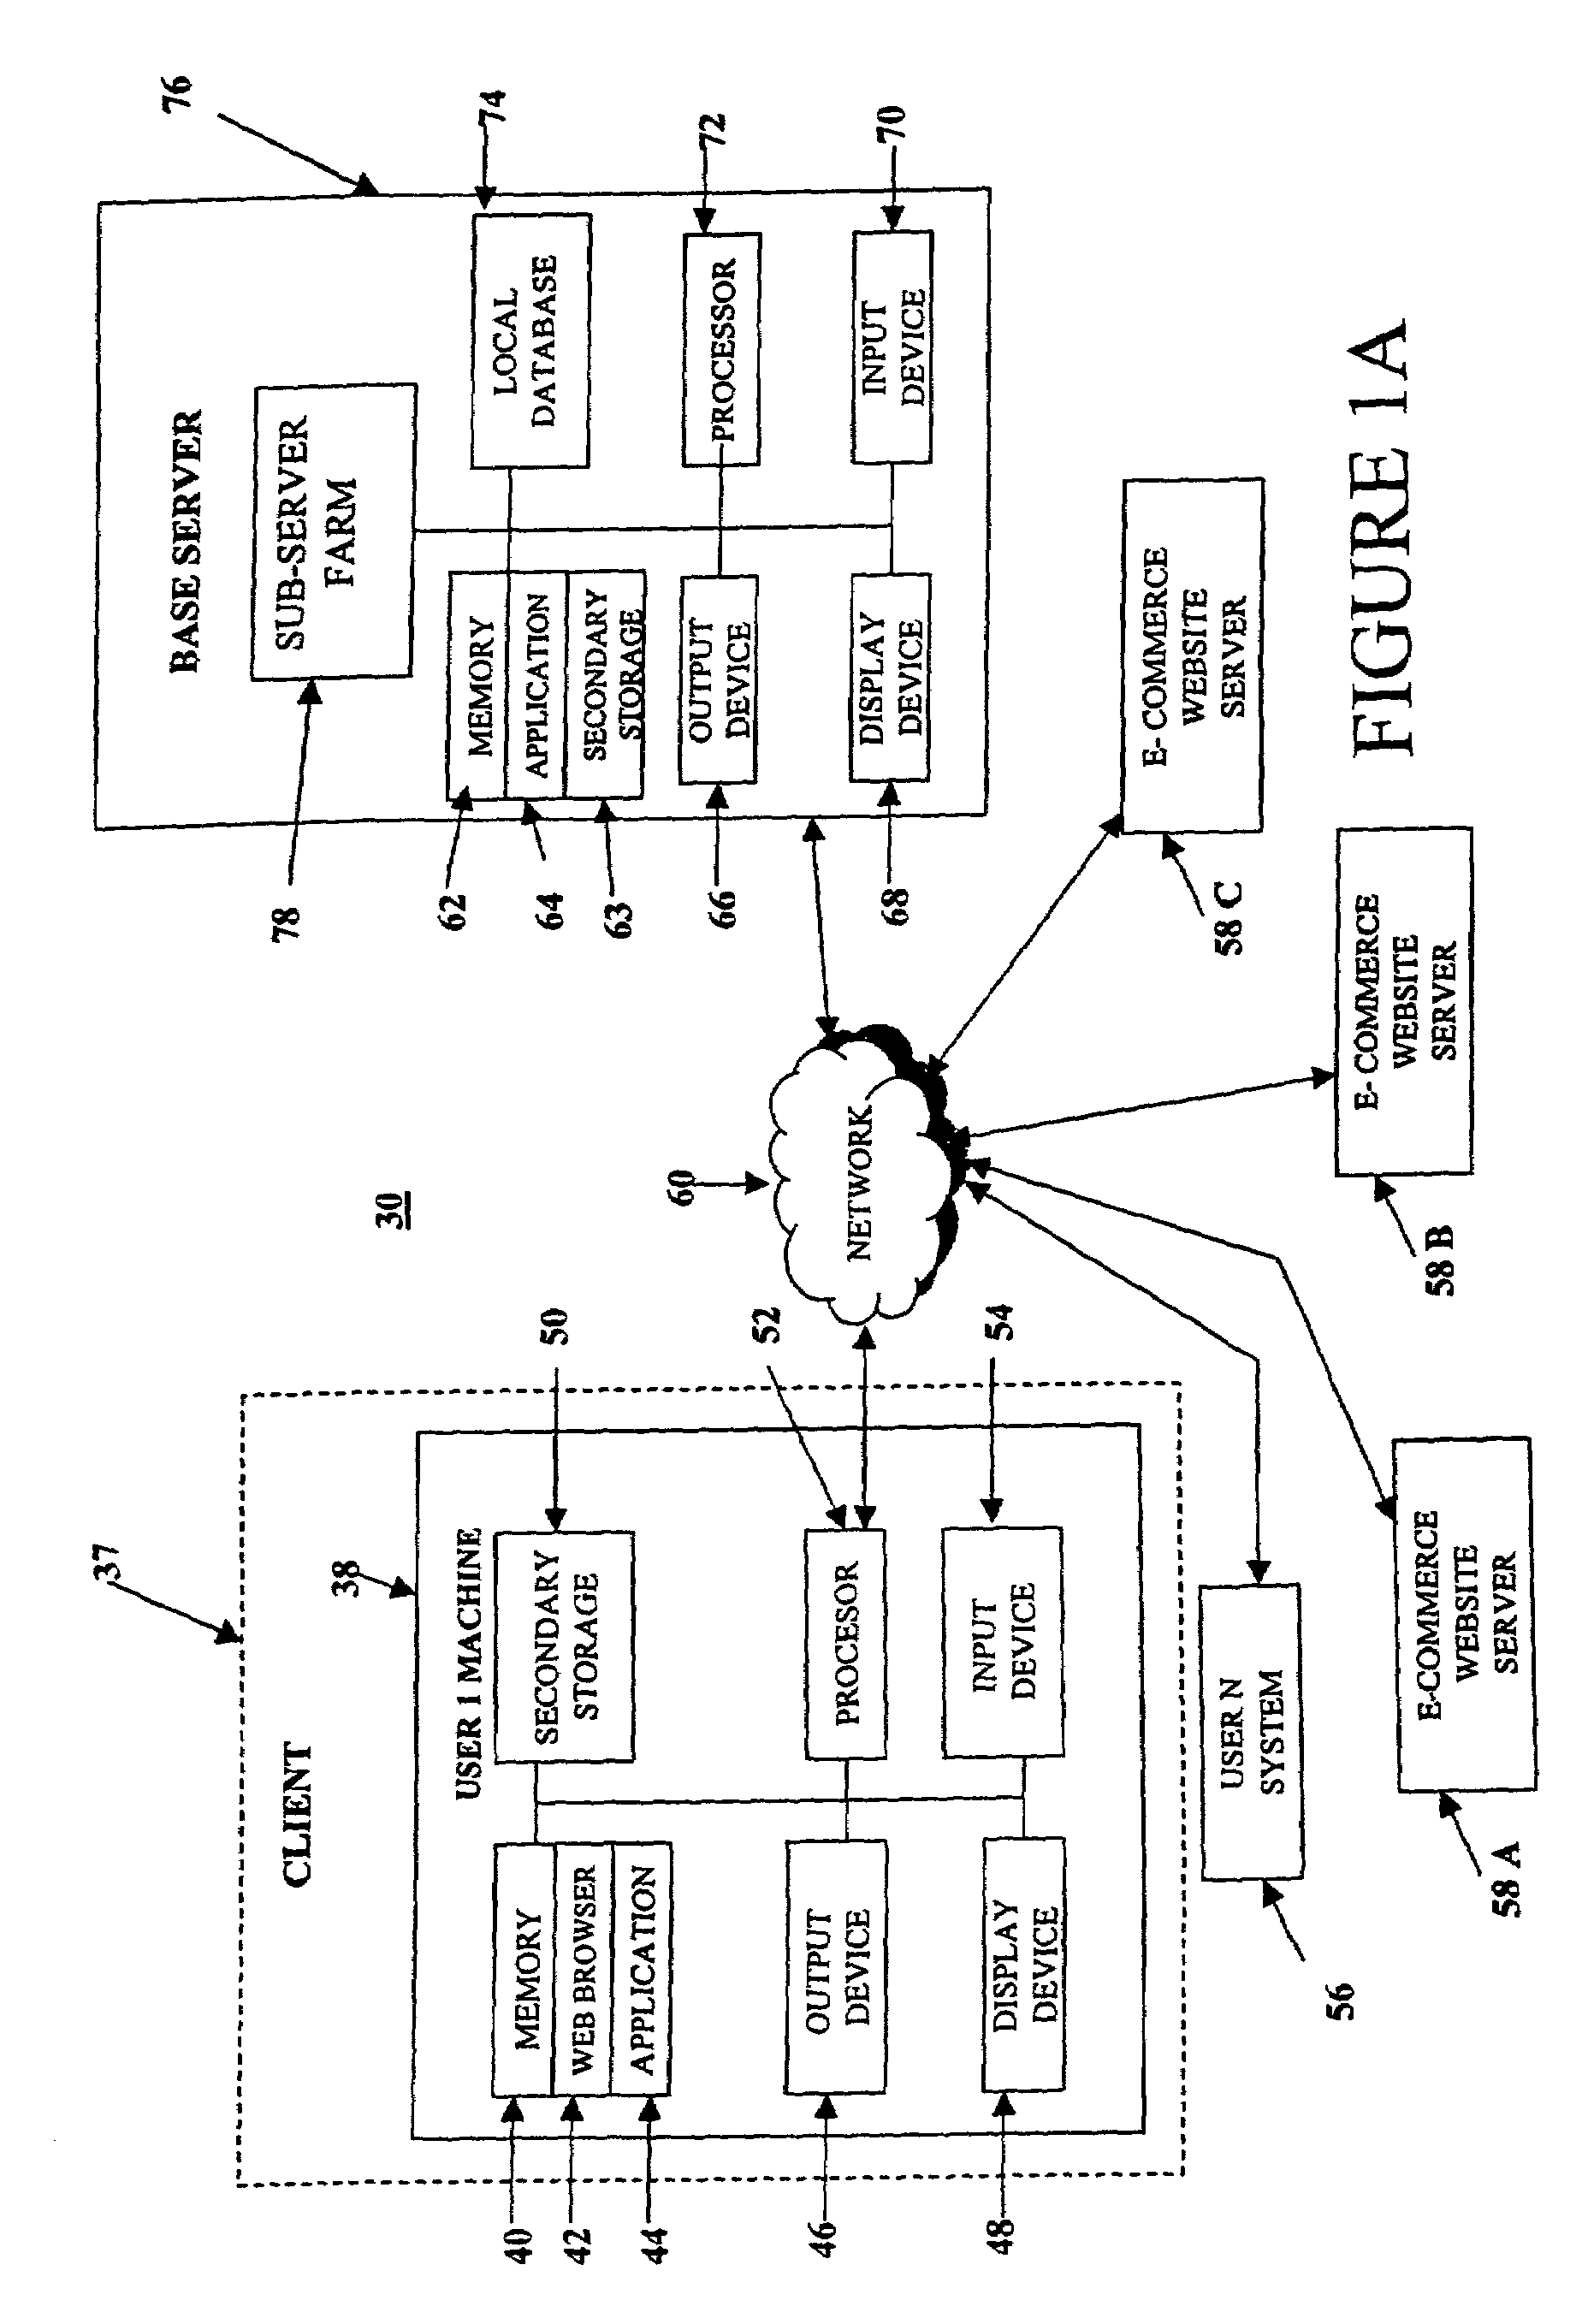 System and method for an interactive shopping news and price information service